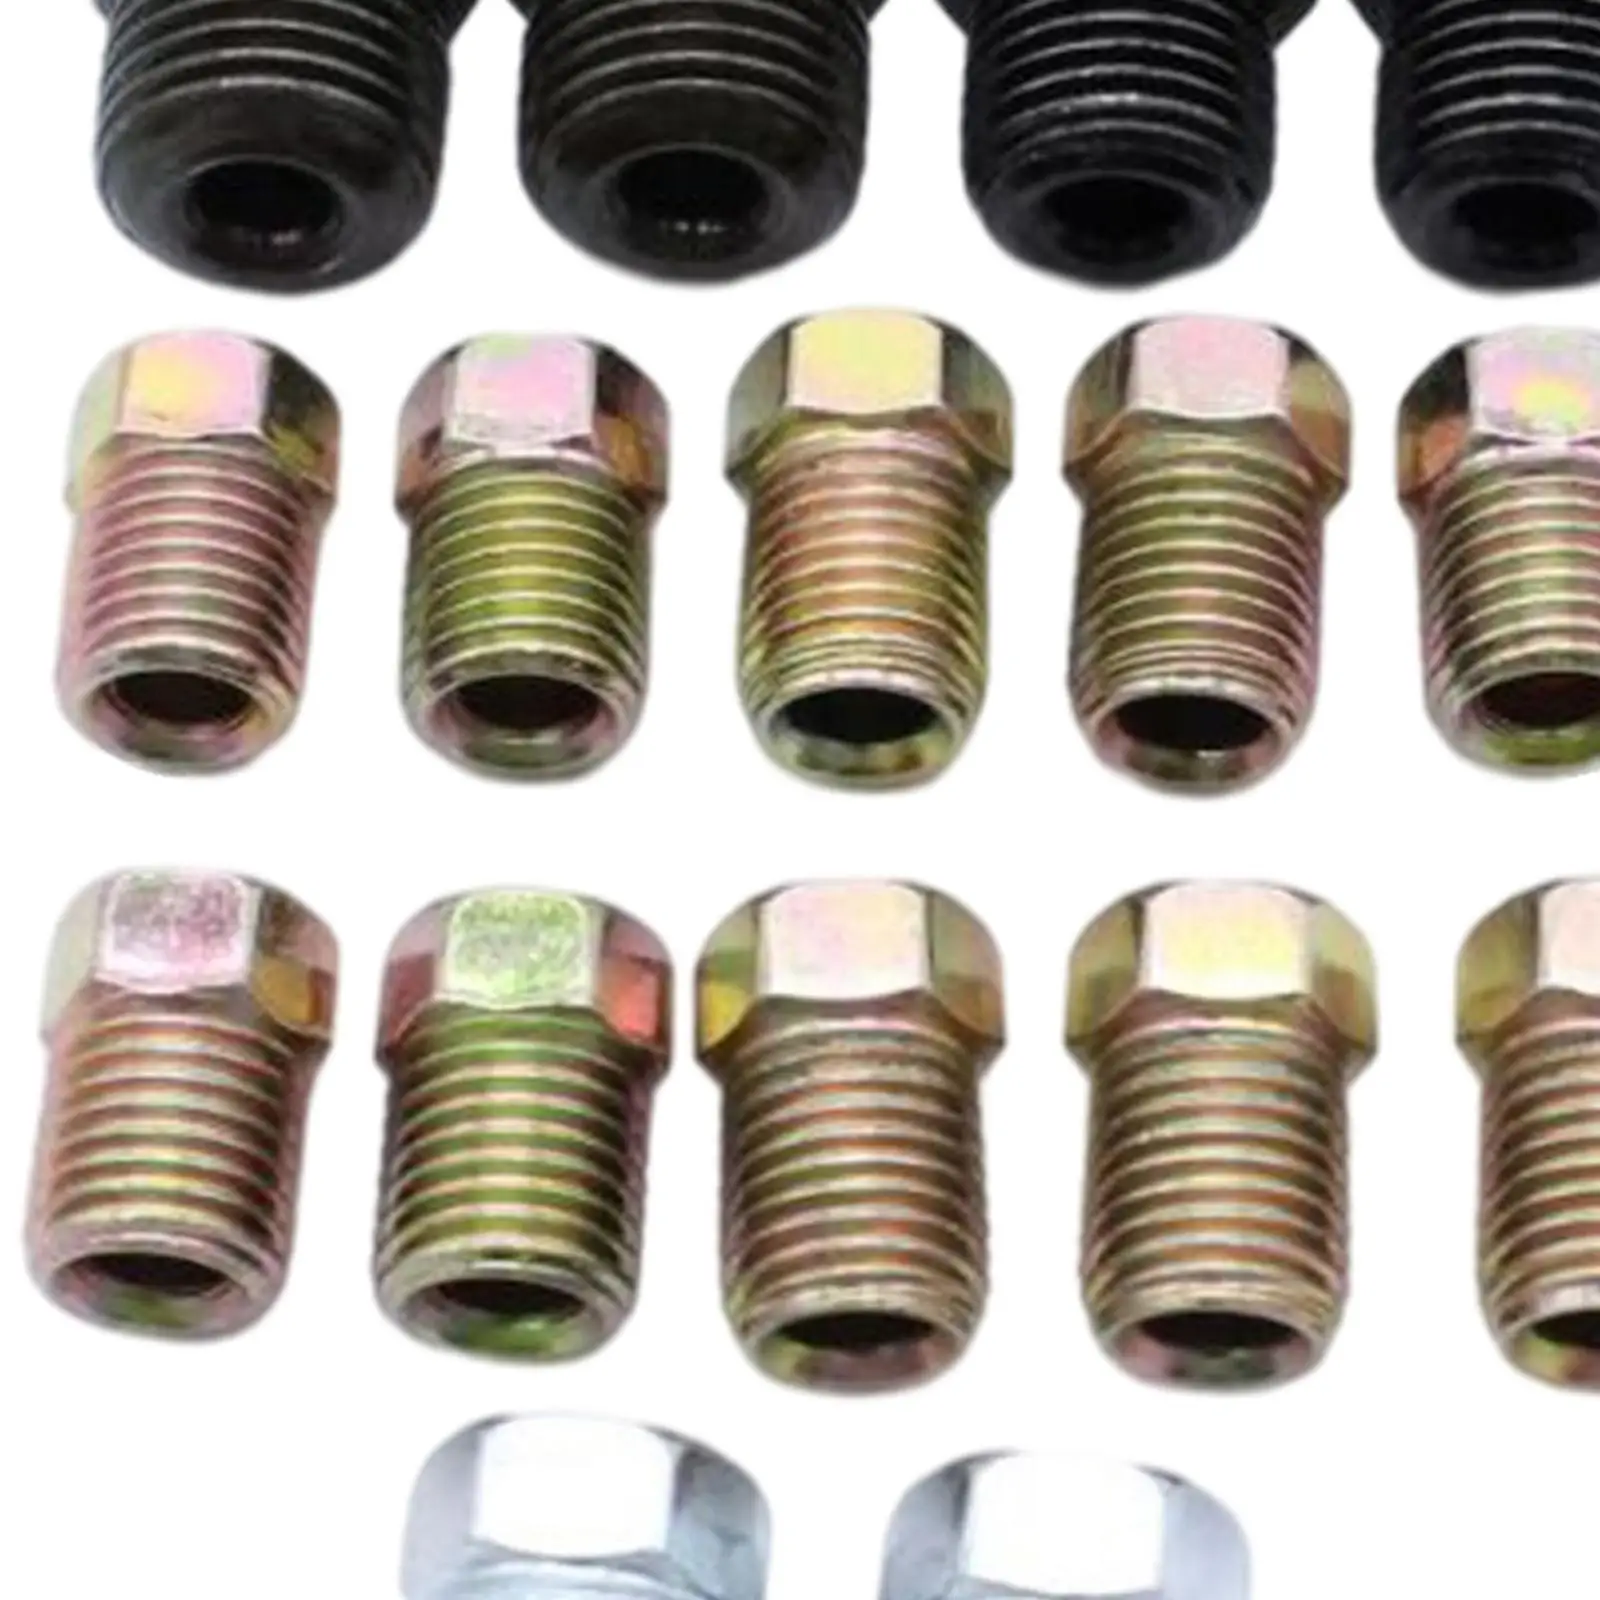 16-Pack Inverted Tube Nuts Assortment Fit for 3/16 Tube Replacement